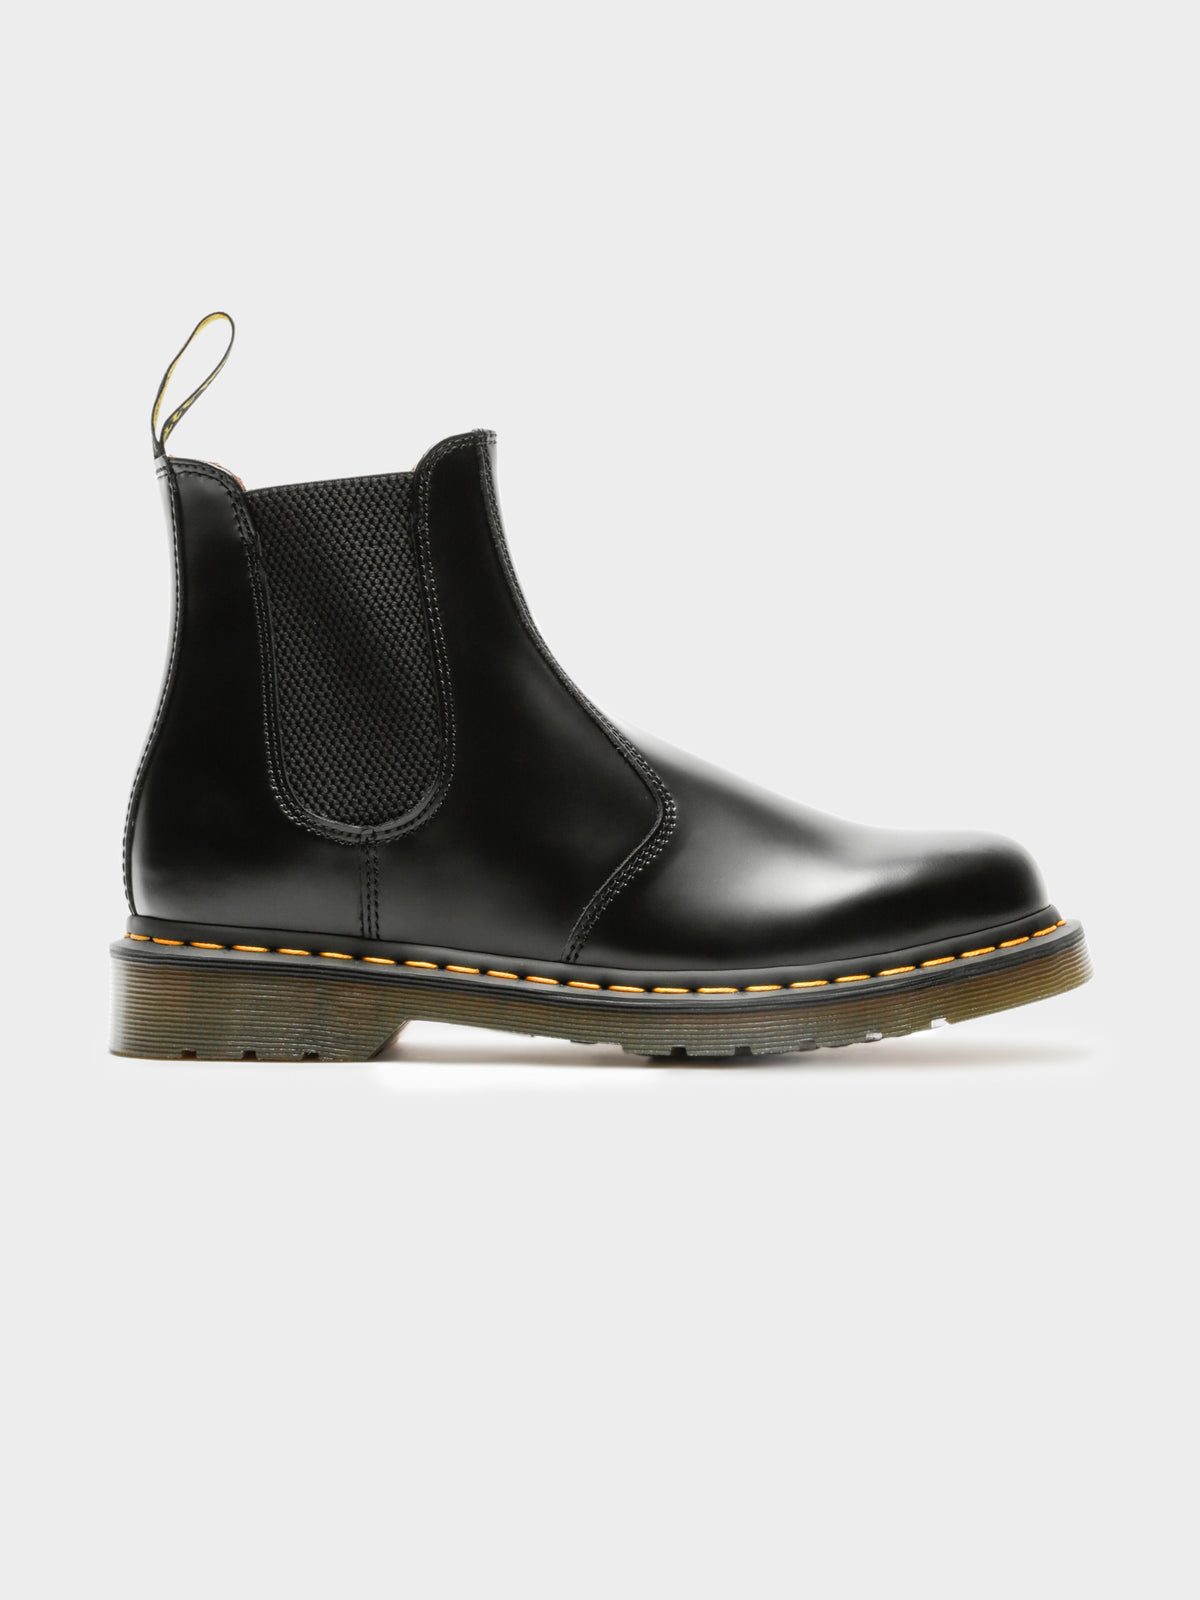 Unisex 2976 Chelsea Boots in Black Smooth